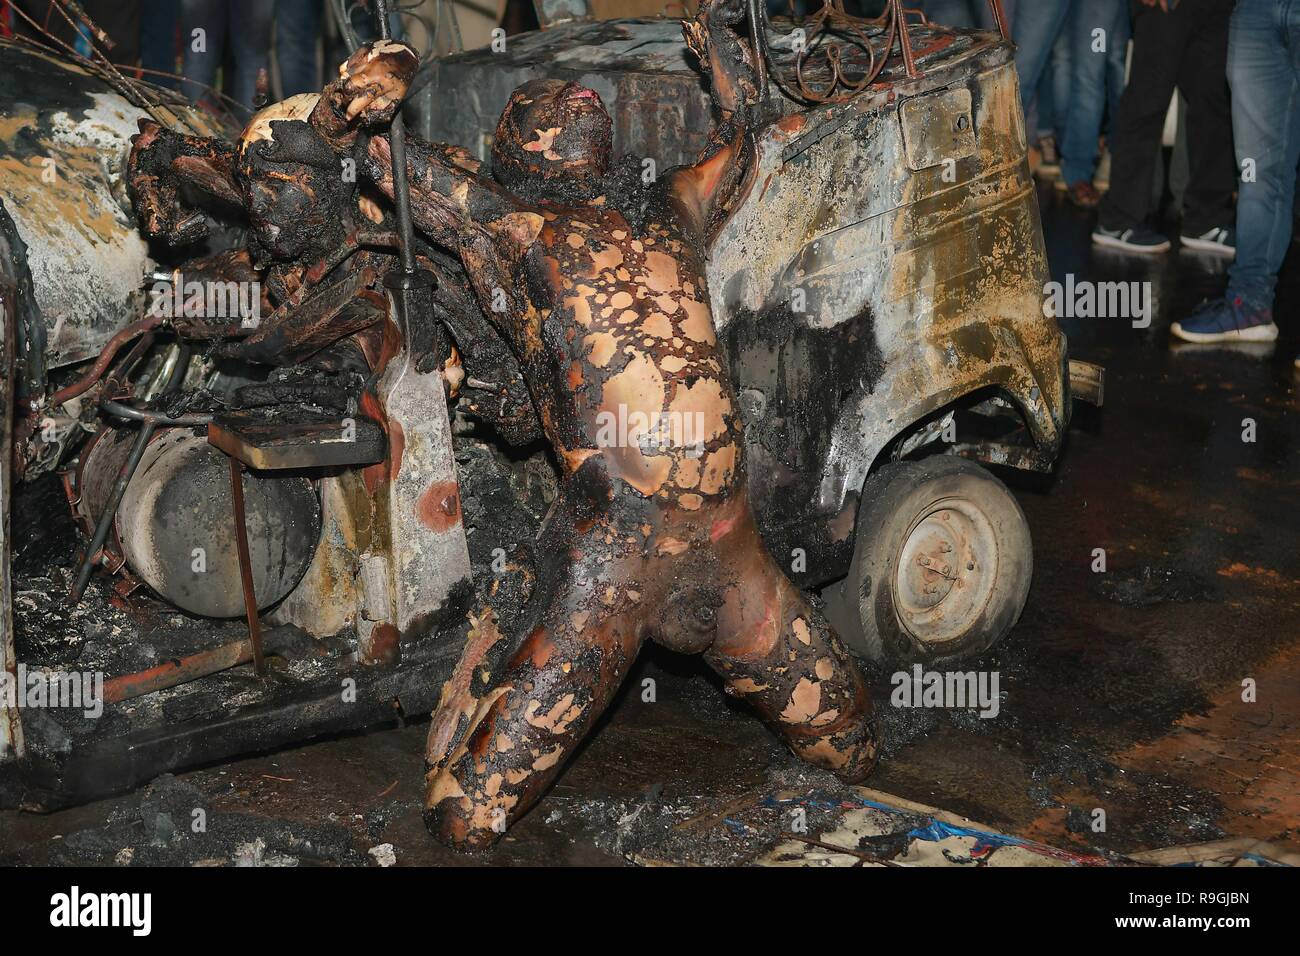 Agartala, Tripura, India. 22nd Dec, 2018. (EDITOR'S NOTE: IMAGE DEPICTS DEATH).After math of the crash seen with burnt bodies hanging out of the vehicle.Tragic road mishap at Amtali, 3 charred to death, 4 injured when two vehicles crushed face on resulting into a fire. Credit: Abhisek Saha/SOPA Images/ZUMA Wire/Alamy Live News Stock Photo